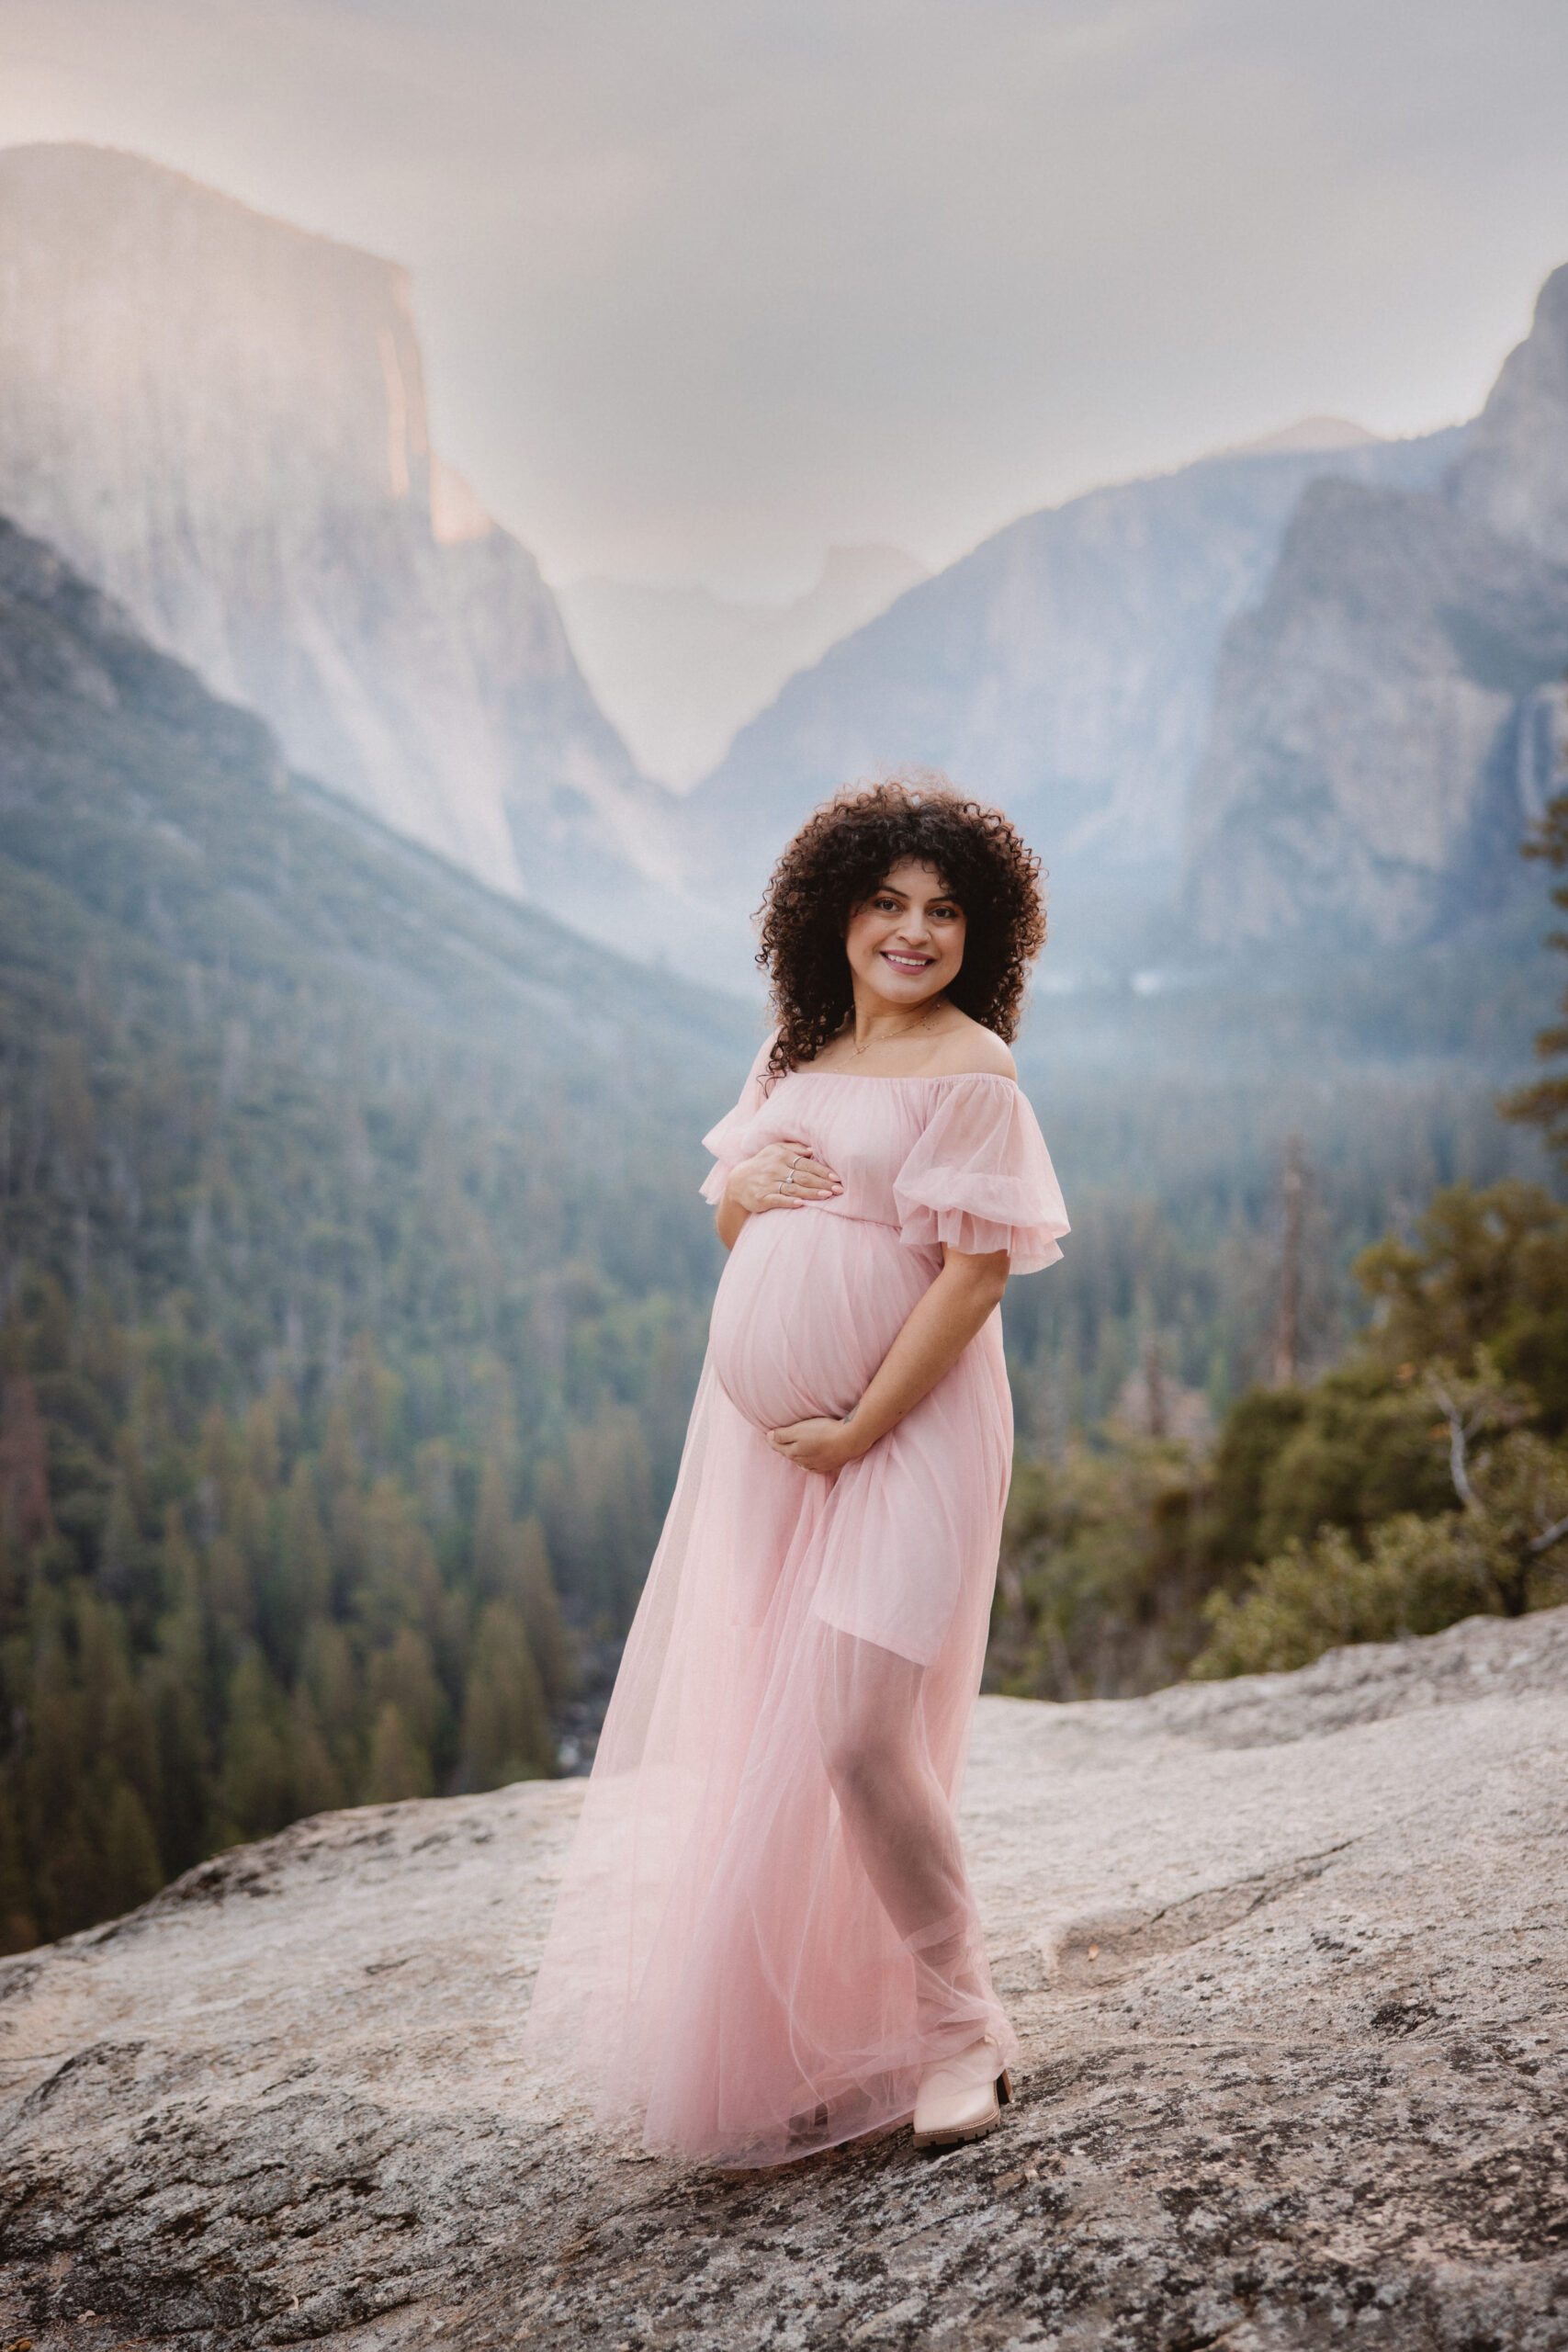 Pregnant woman in a pink dress standing on a rocky terrain with a scenic forest and mountain backdrop during sunset at her maternity photoshoot